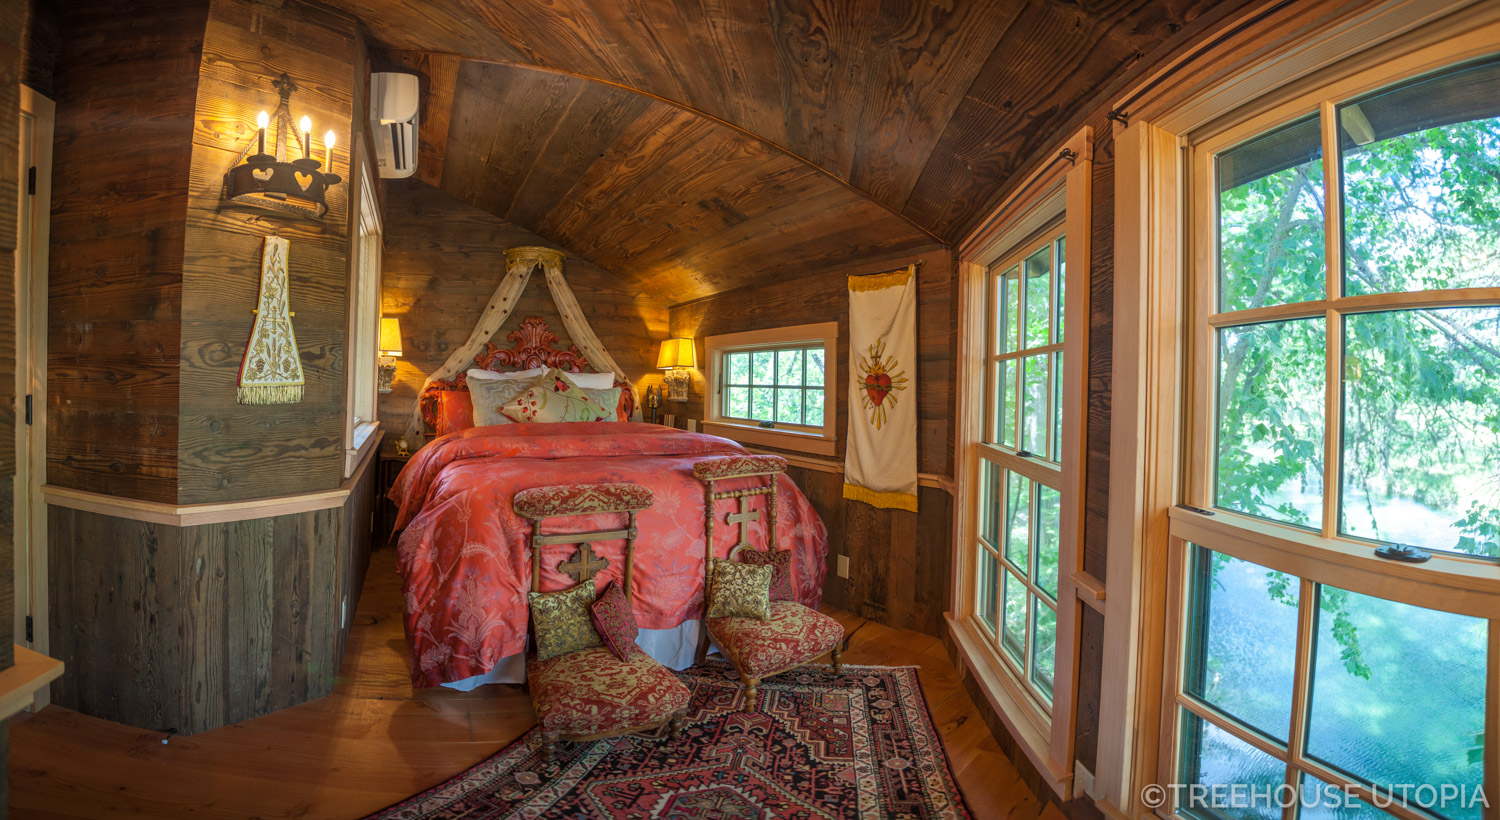  View from the bed inside Chapelle at Treehouse Utopia, a Texas Hill Country Retreat. Photo by Nelson Treehouse. 